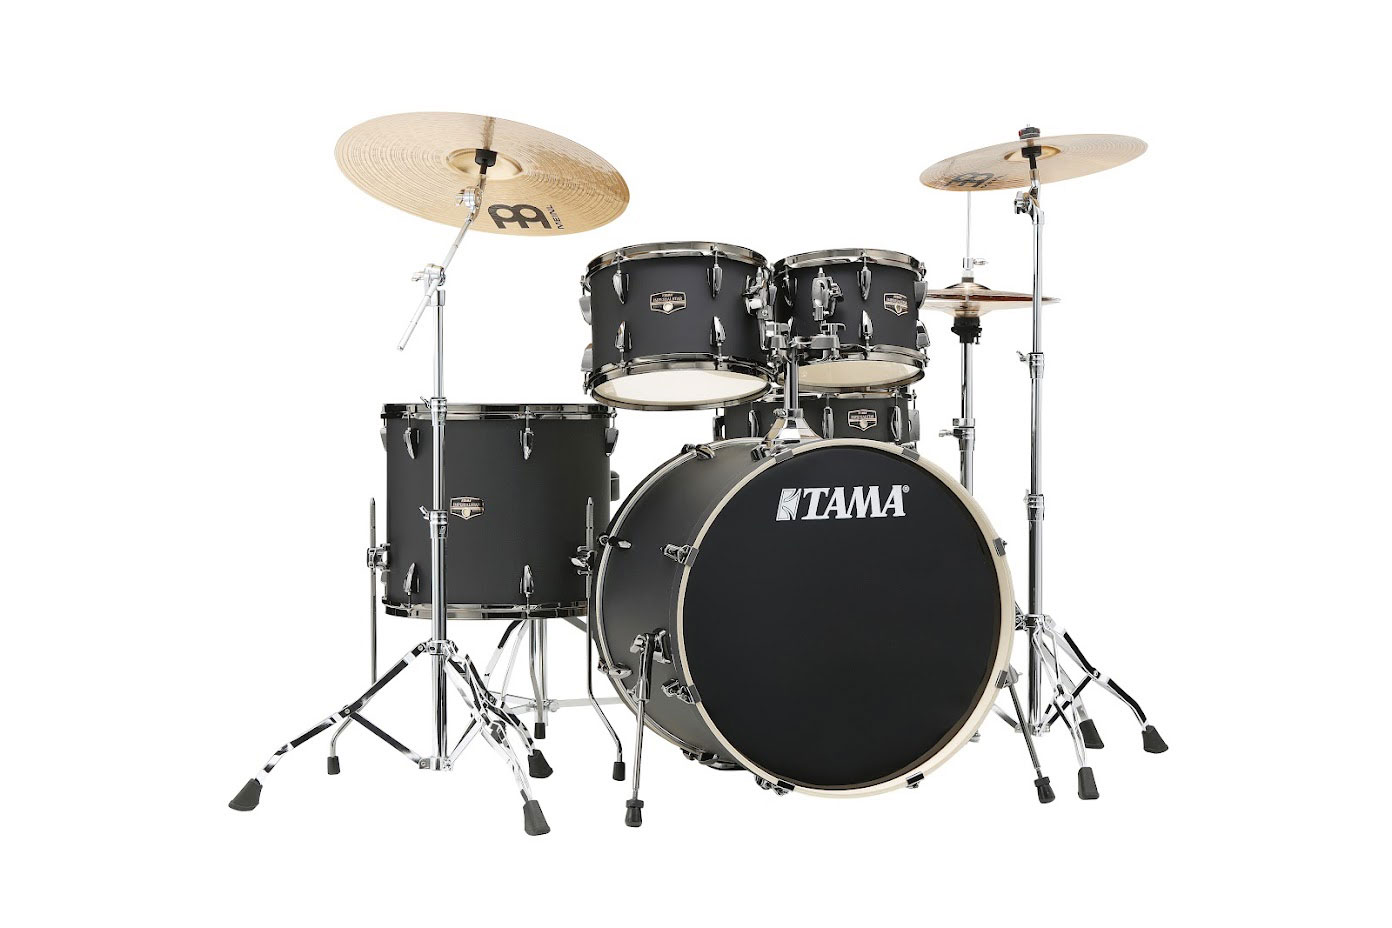 TAMA IMPERIALSTAR STAGE 22 DRUM KIT BLACKED OUT BLACK